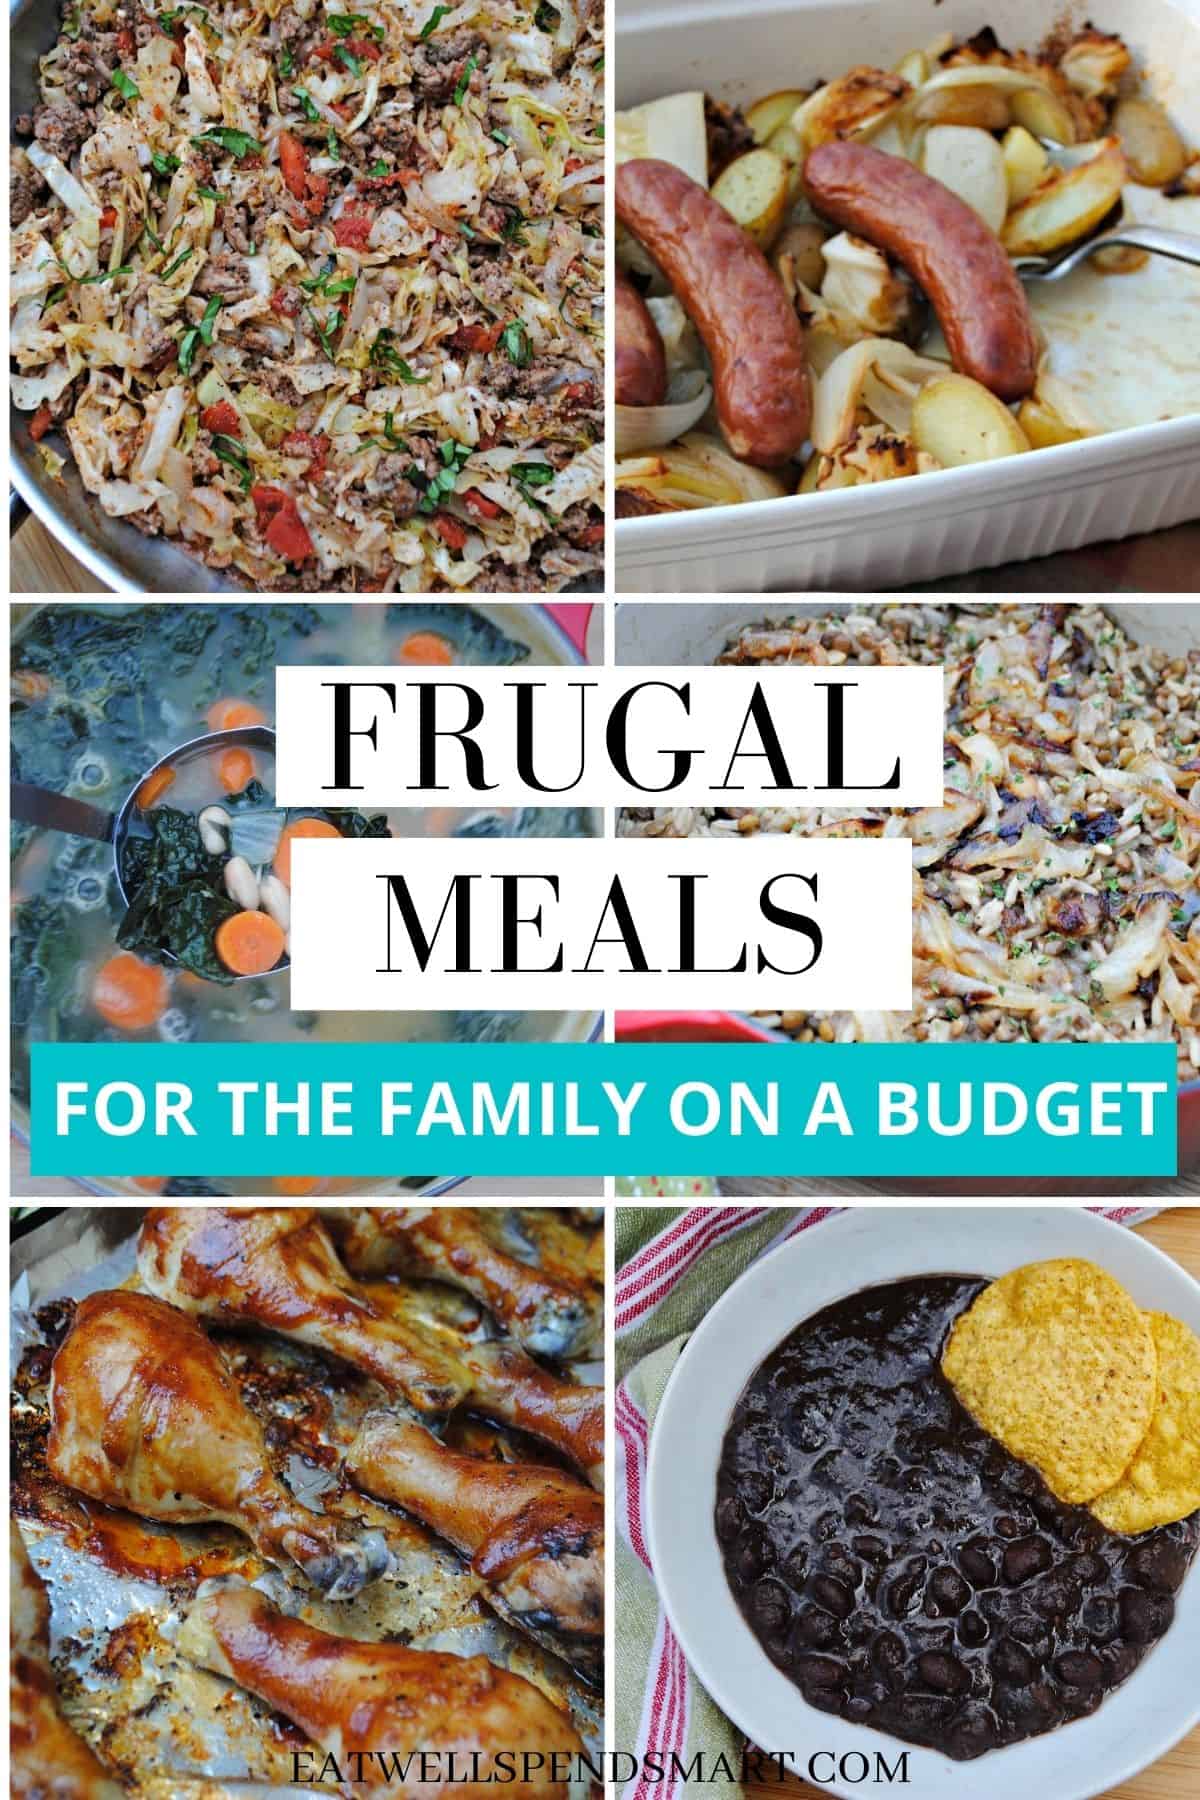 $1 Meals: 12 Super Cheap Meals on a Budget - Positively Frugal